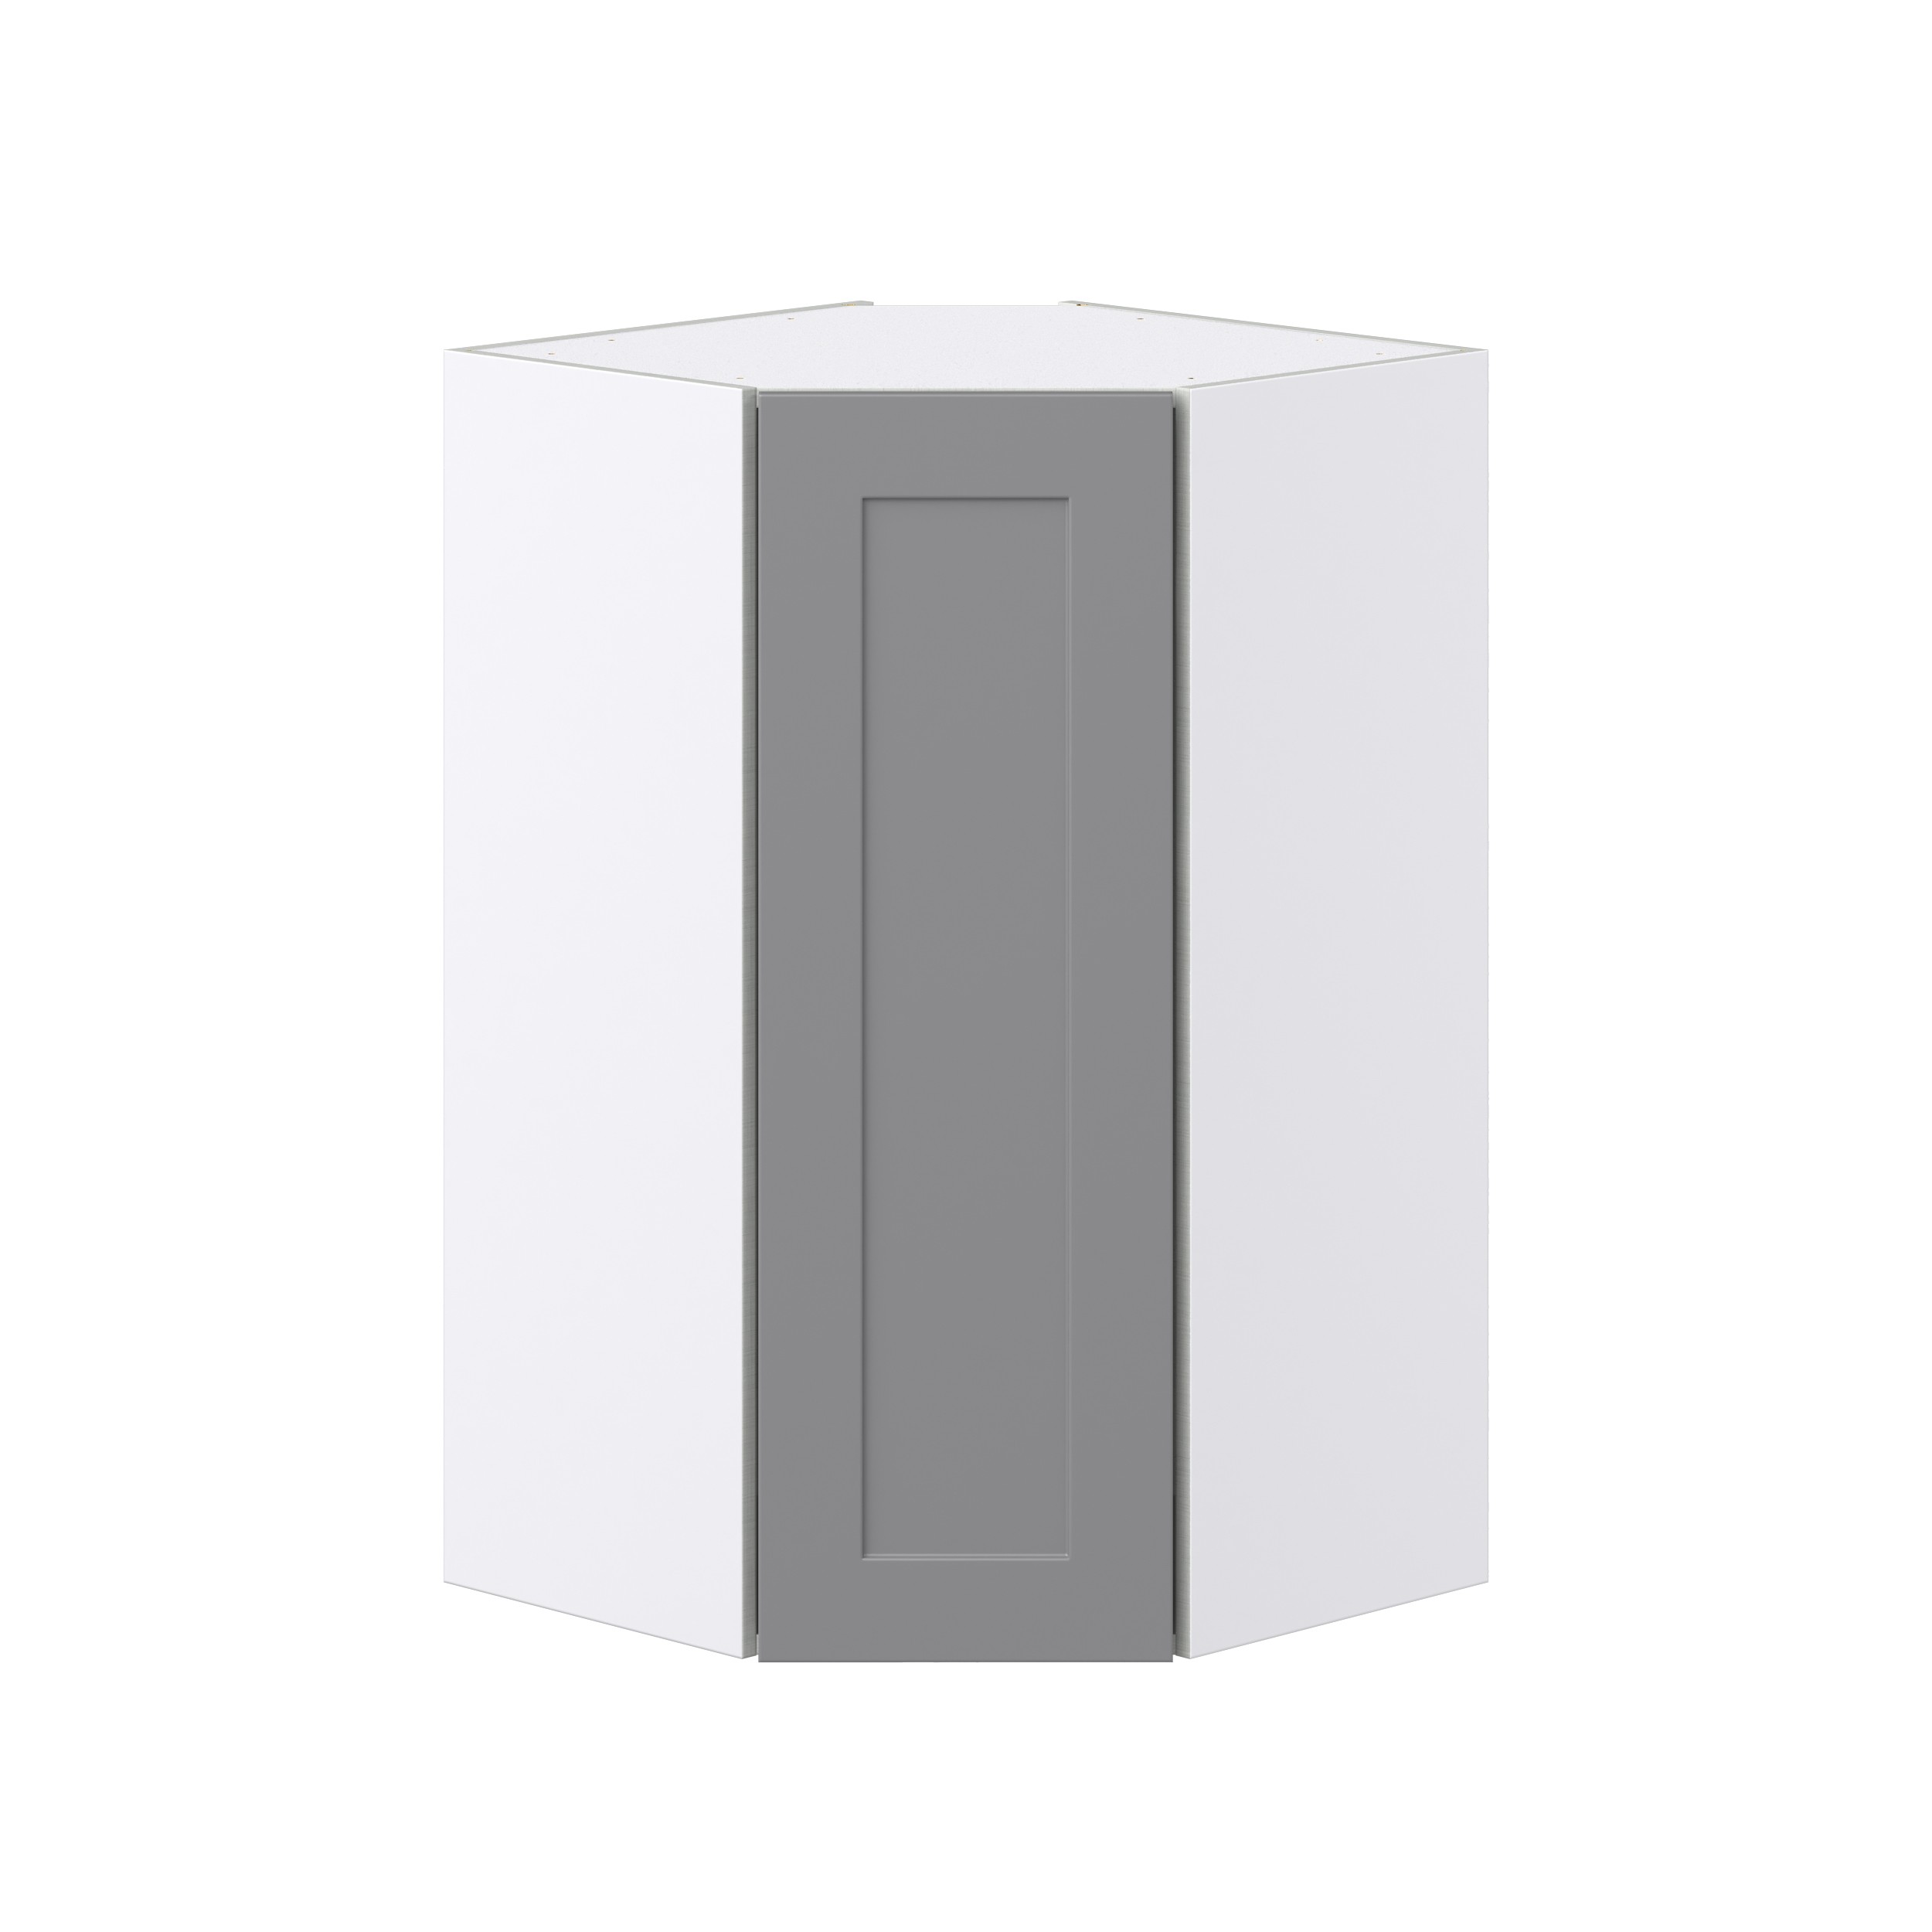 Willow Painted Slate Gray Shaker Assembled Wall Diagonal Corner Cabinet with a Door (24 in. W x 40 in. H x 24 in. D)